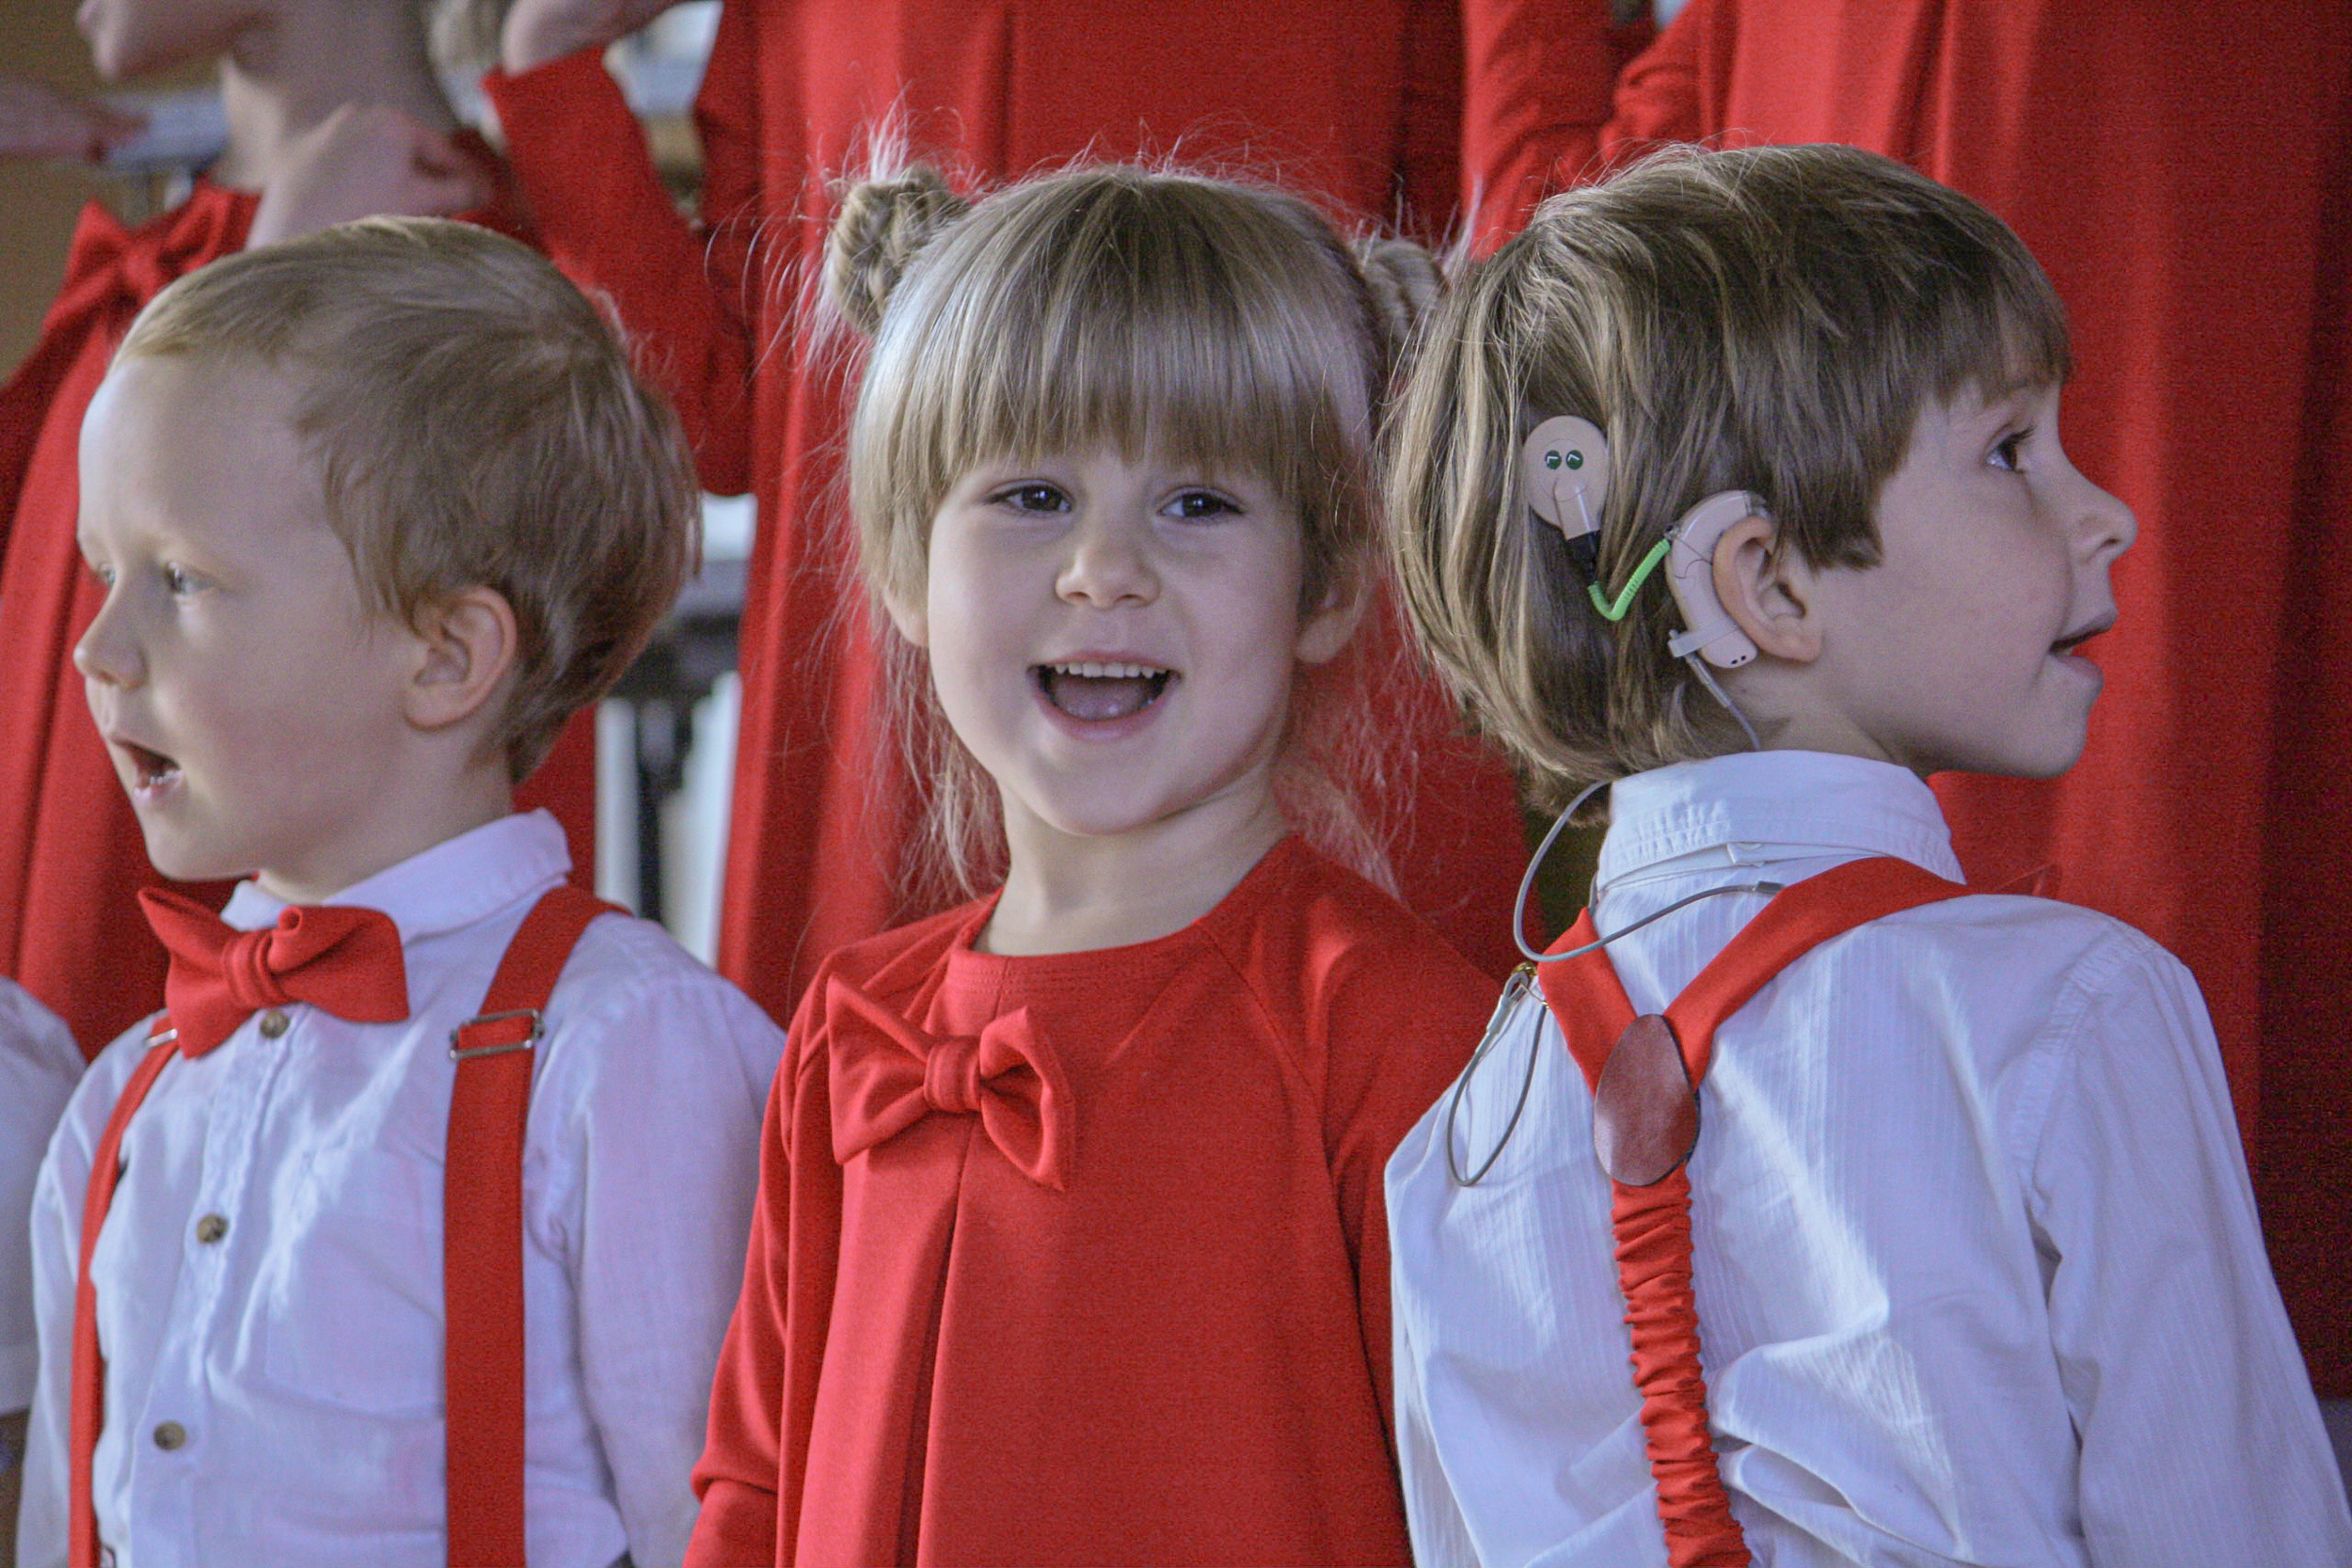 Ieva Krivickaite, Lithuania: The Beginning, 2019, Ugnele Music School, Lithuania - Ugnele Music School is a private choral school in Vilnius, Lithuania. The youngest singers in the school are 3 years old, but they already put on their own stage performances. The school puts a lot of emphasis on positive education, teaching pupils not only music but also emotional intelligence.